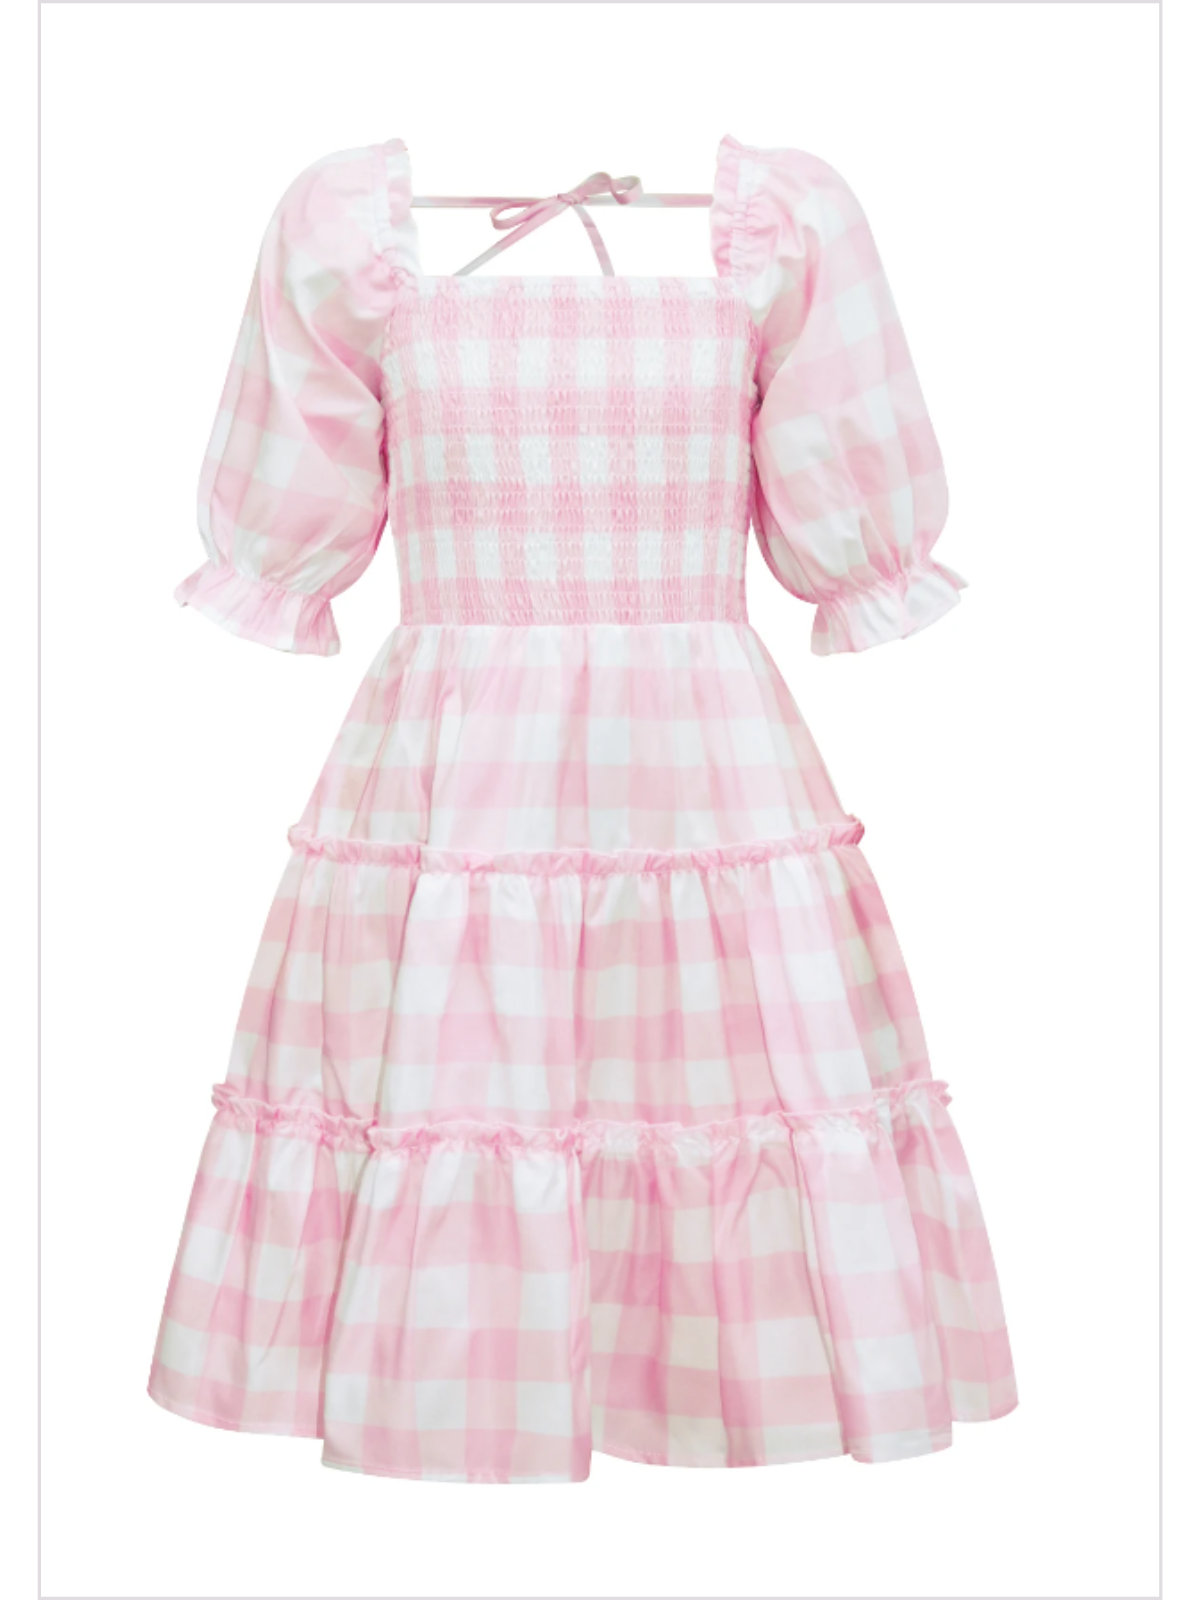 Mia Belle Girls Pink Gingham Smocked Dress | Mommy And Me Dresses